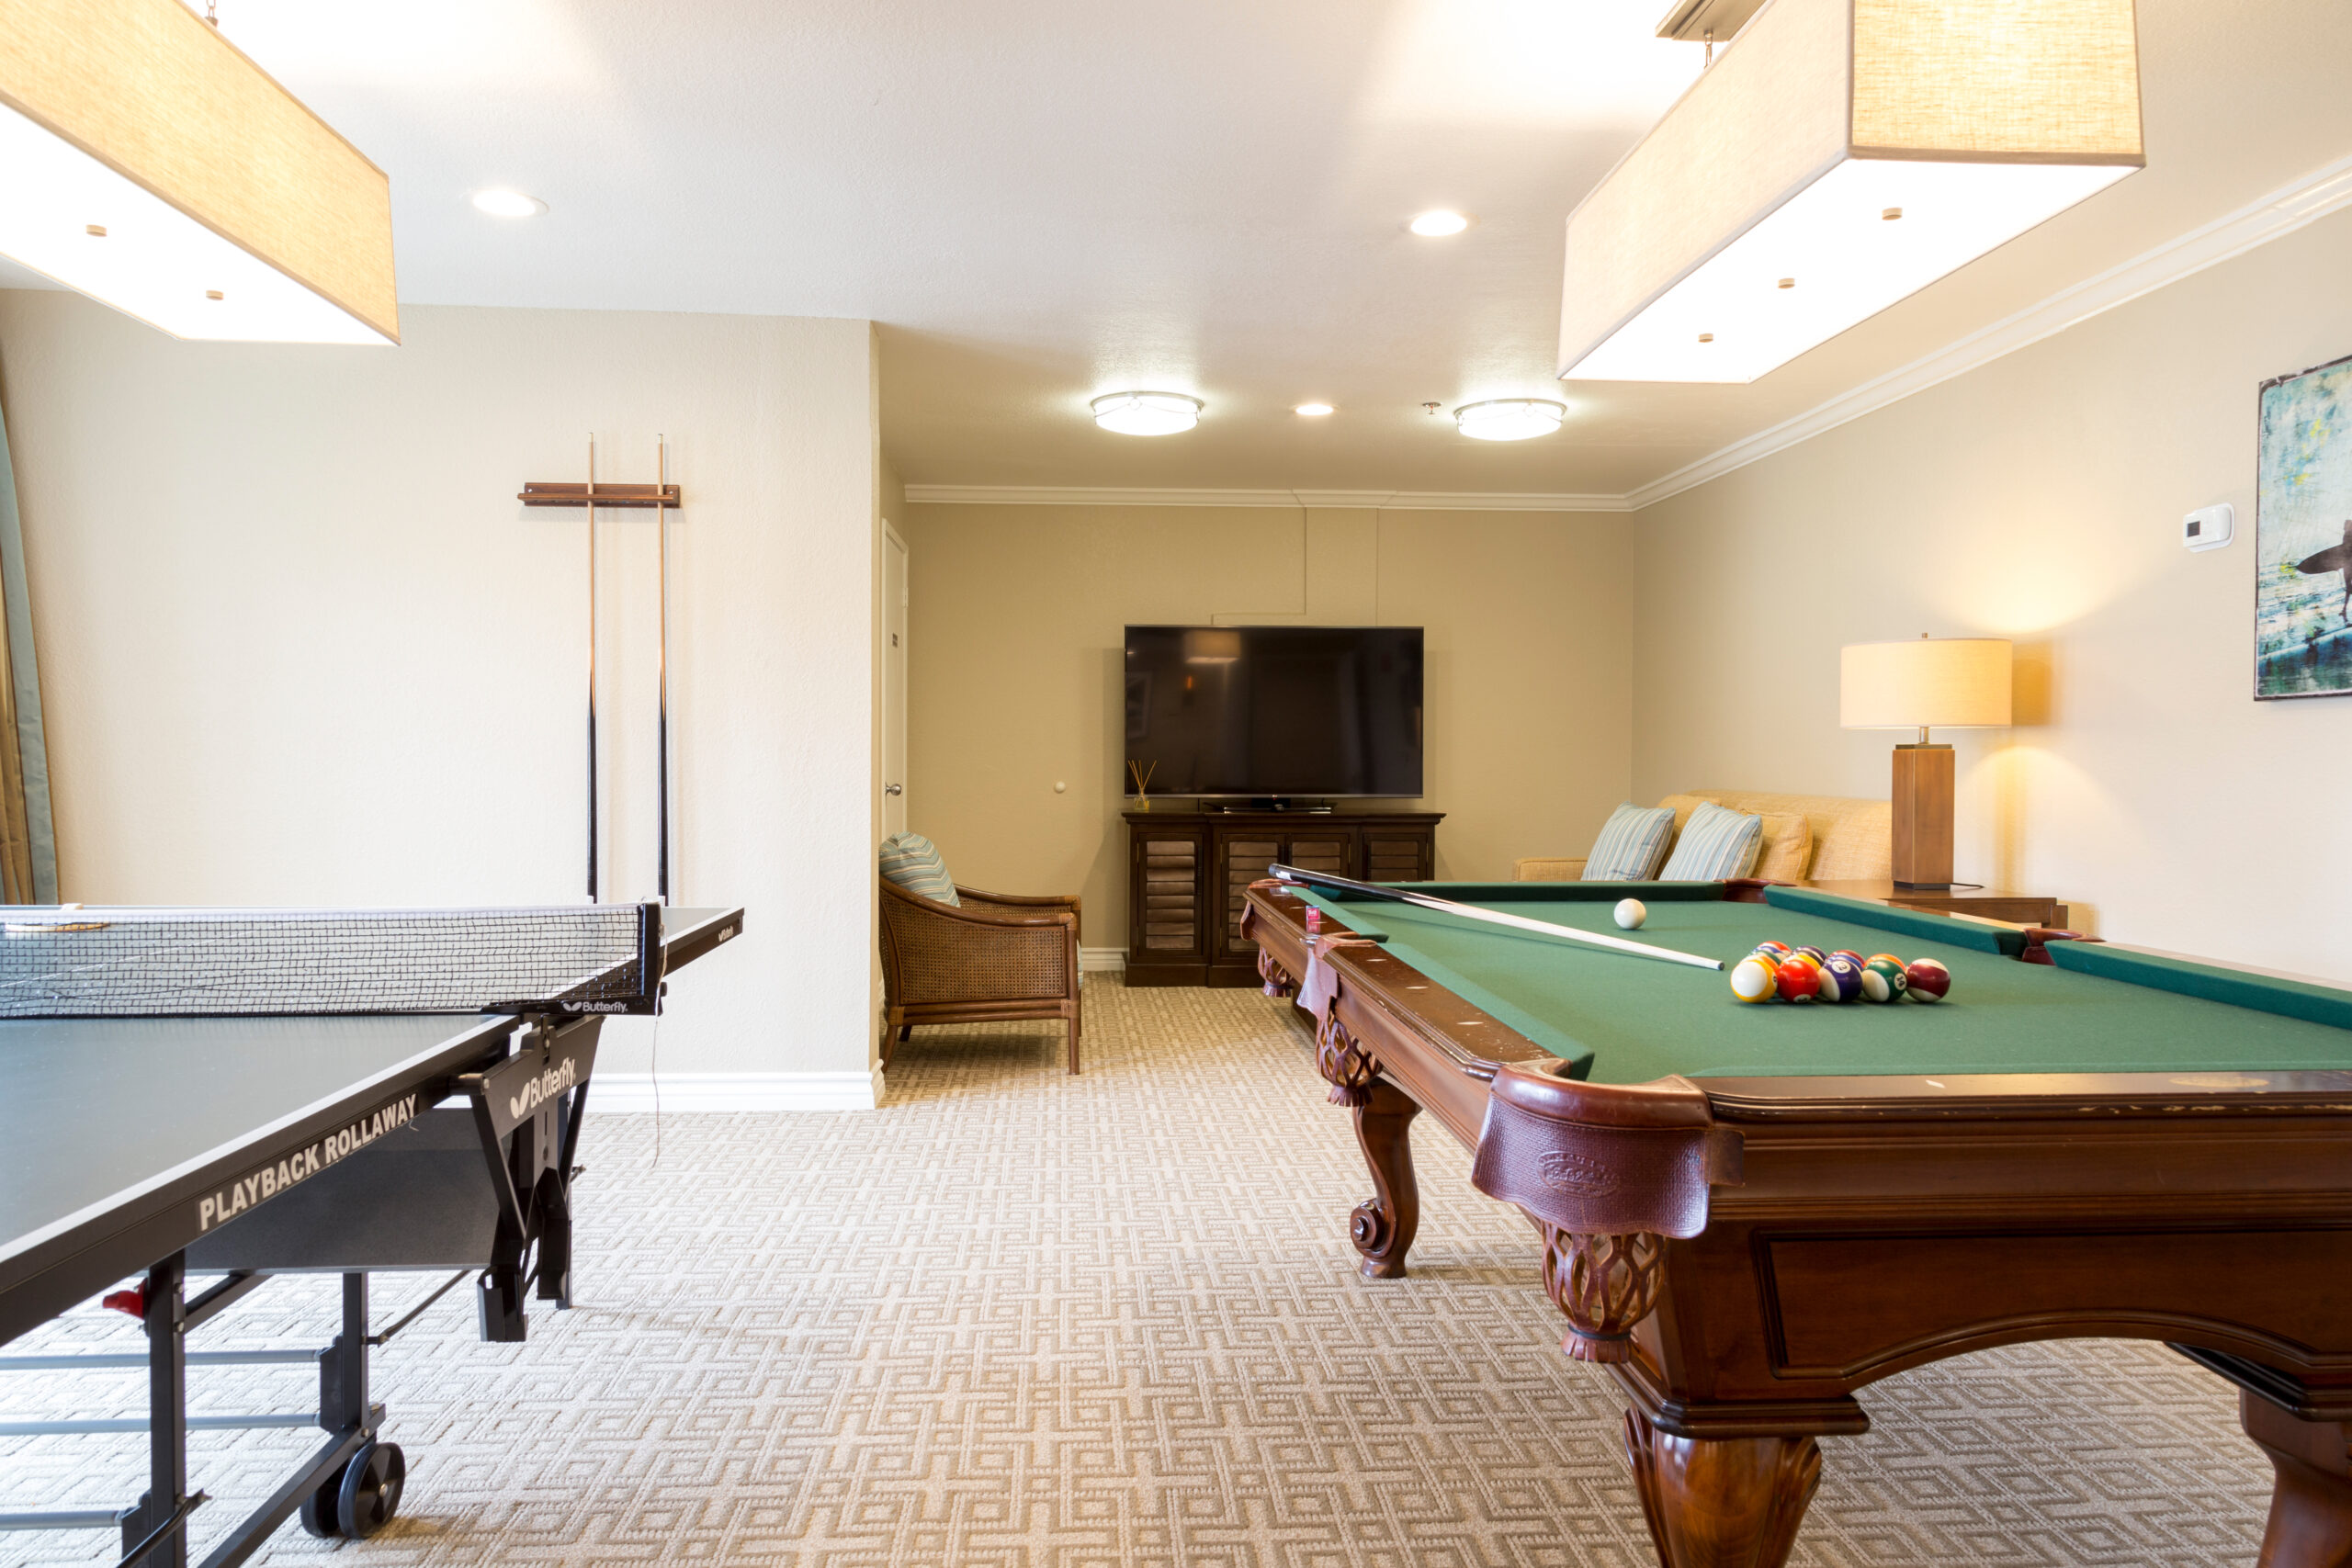 Billiards and ping pong in the lounge